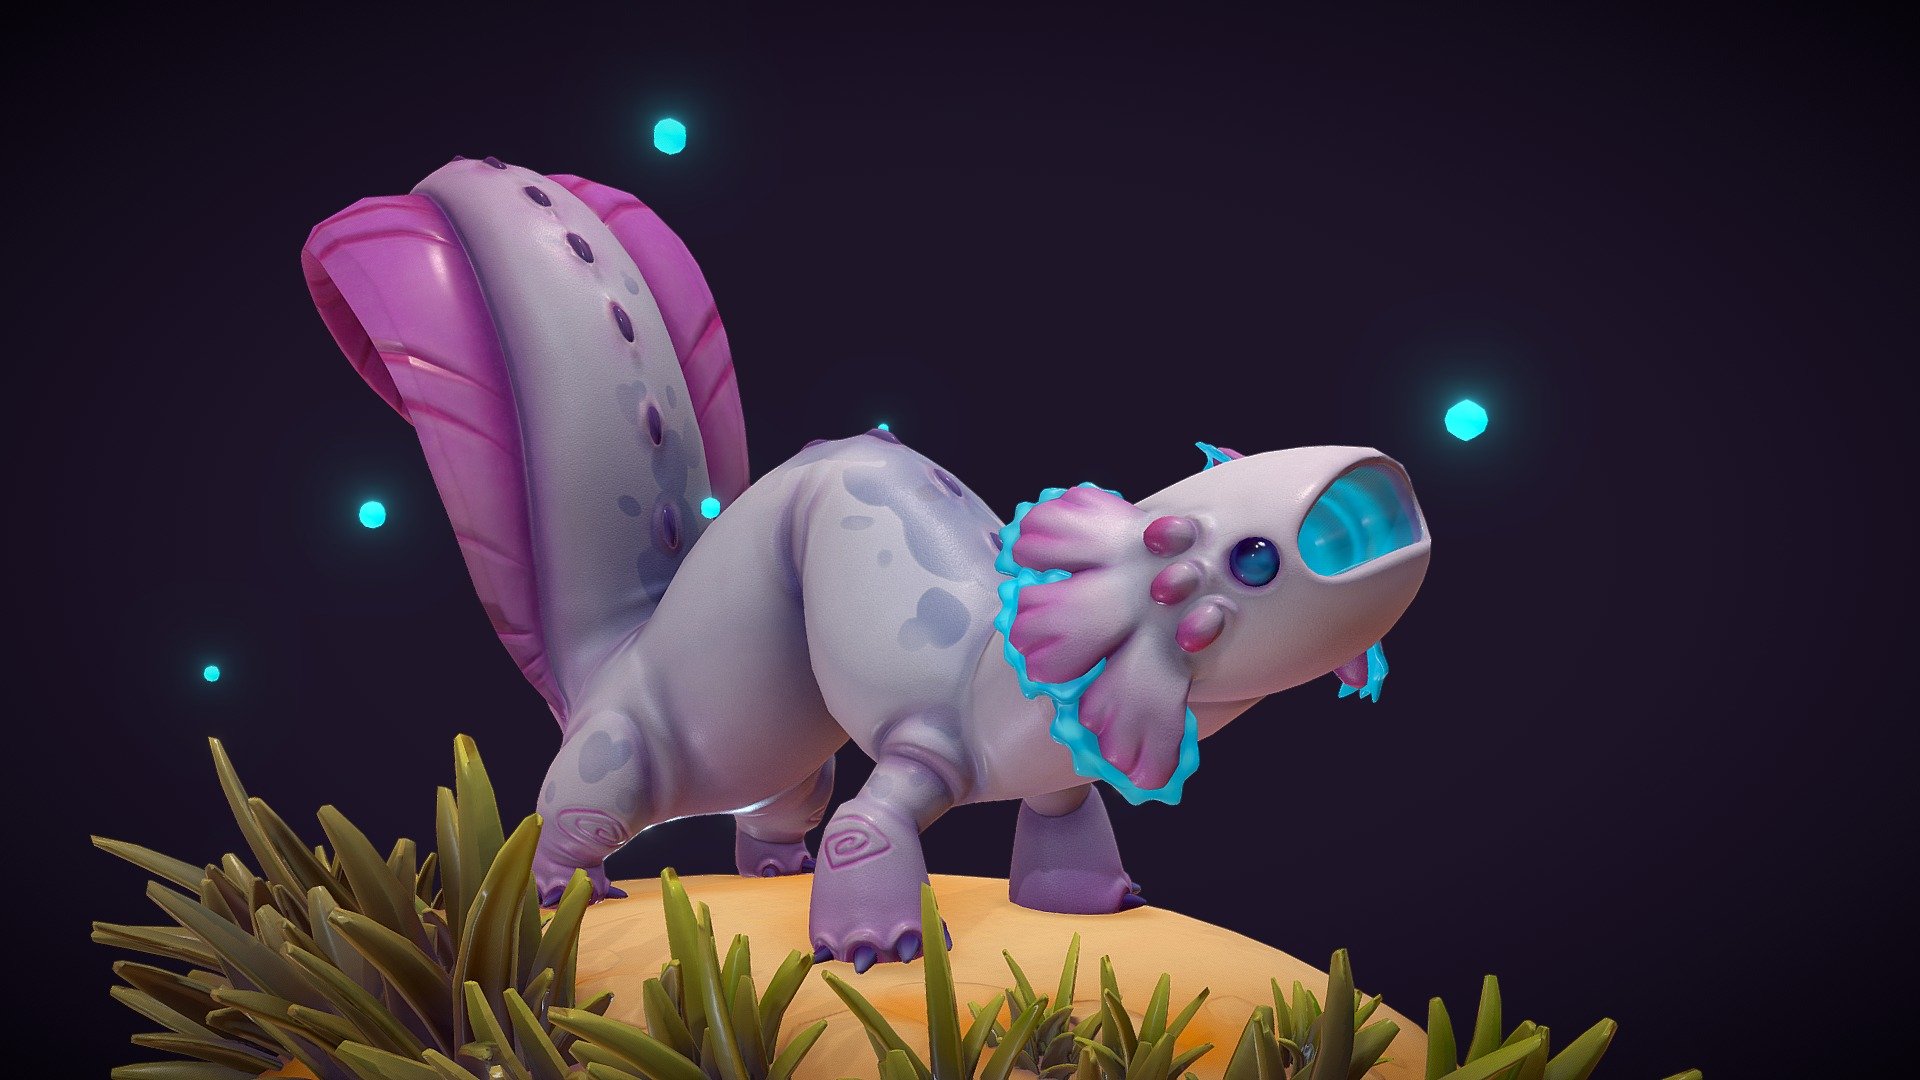 His name is Pip

Concept by the stellar and incredibly skilled Nicholas Kole: https://www.artstation.com/artwork/QrN4K3
I picked him because every time I looked at the concept art it made me smile :)

The lil background is suuuper rushed and I hope I'll have some time to fix it up nicely, the lil guy deserves it - [DAE] Cute Creature - Axolotl Squirrel - 3D model by Giurgea Irina (@GiurgeaIrina) 3d model